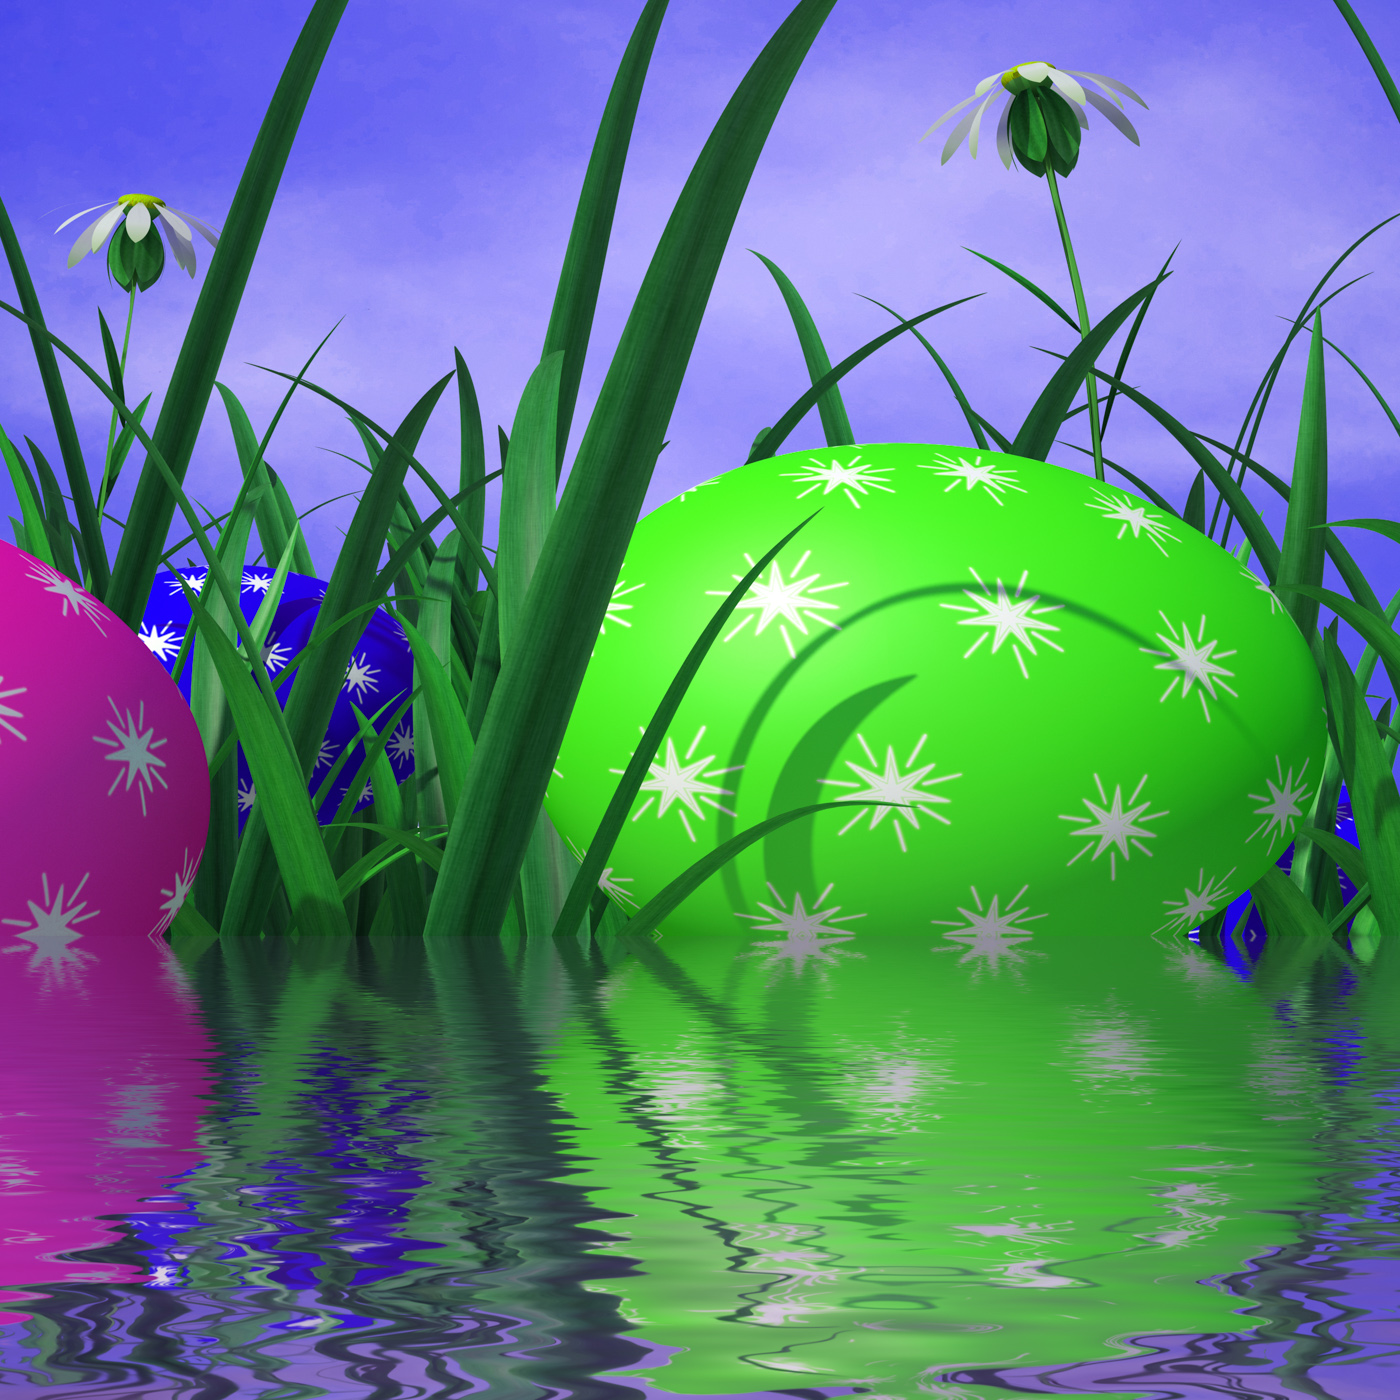 Easter eggs represents green grass and environment photo